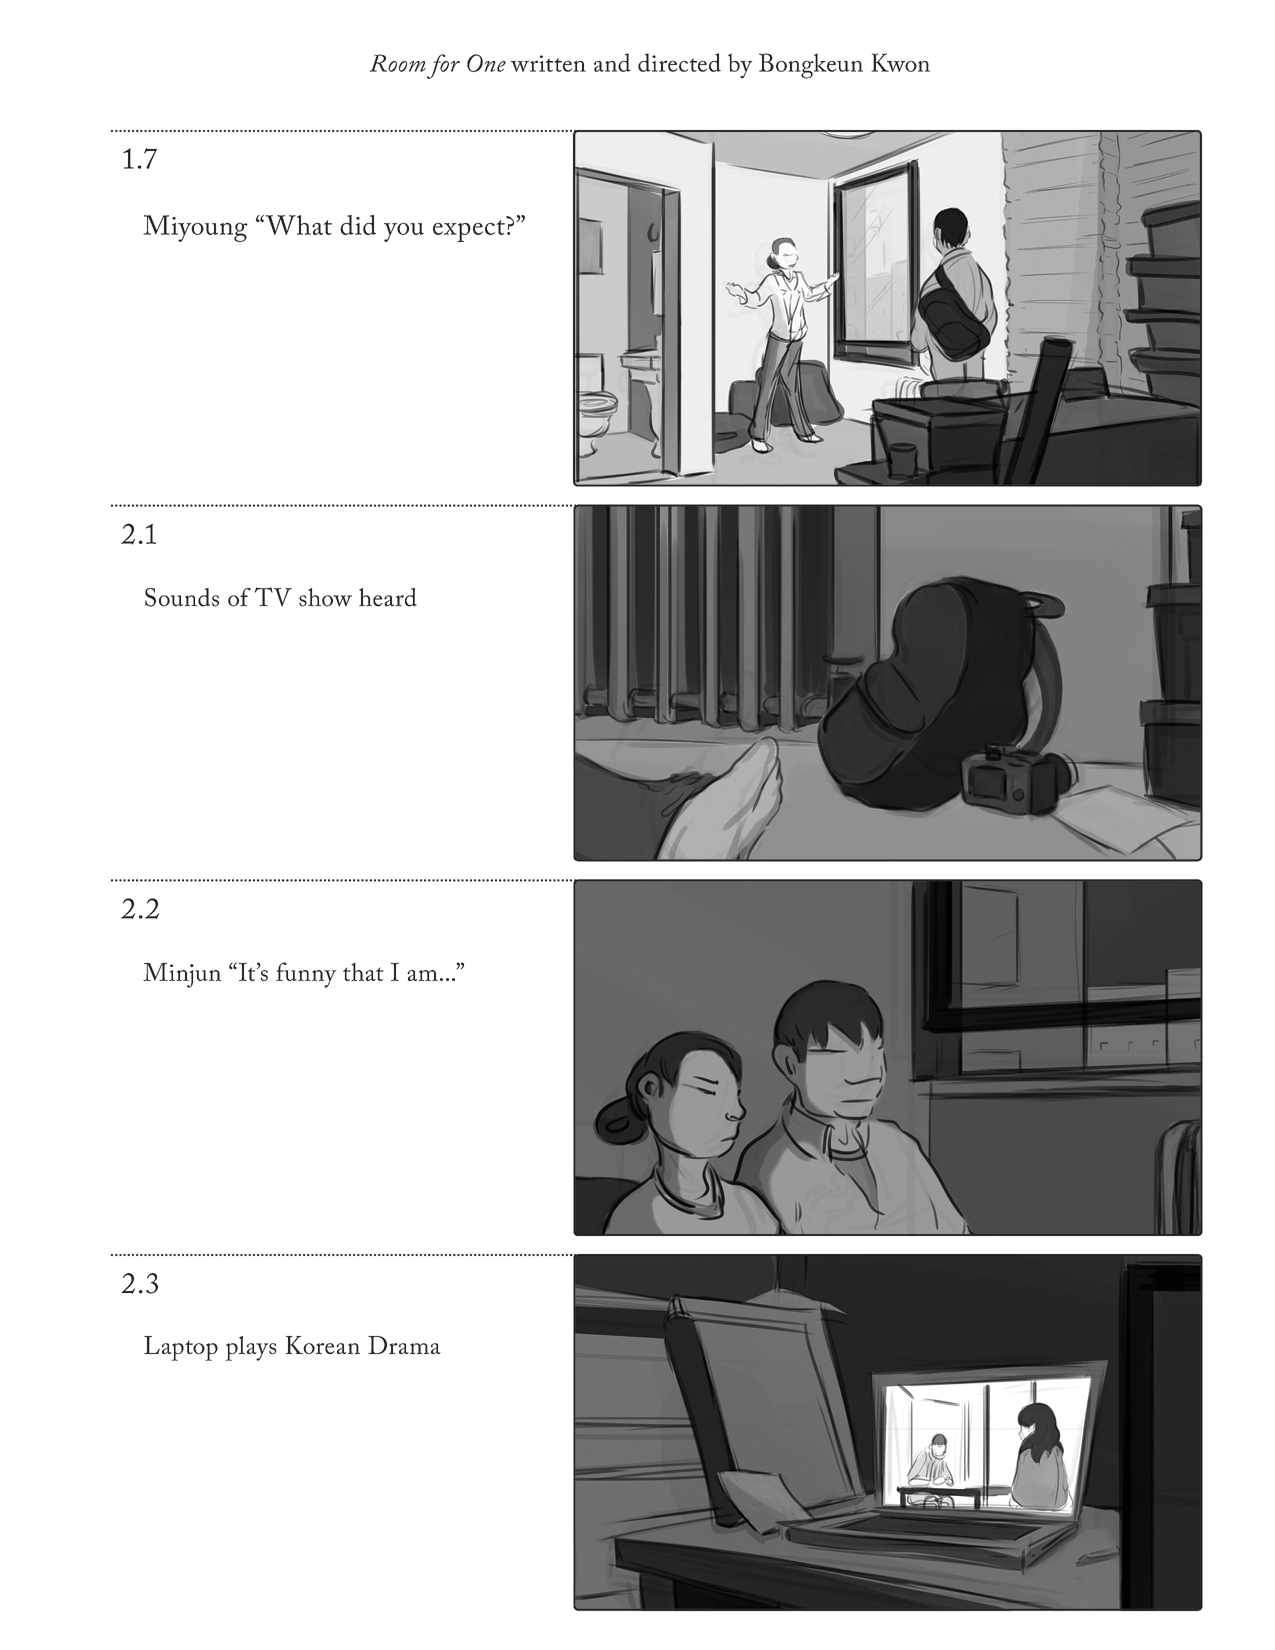 All-live-action-storyboards-with-new-vertical-format-4